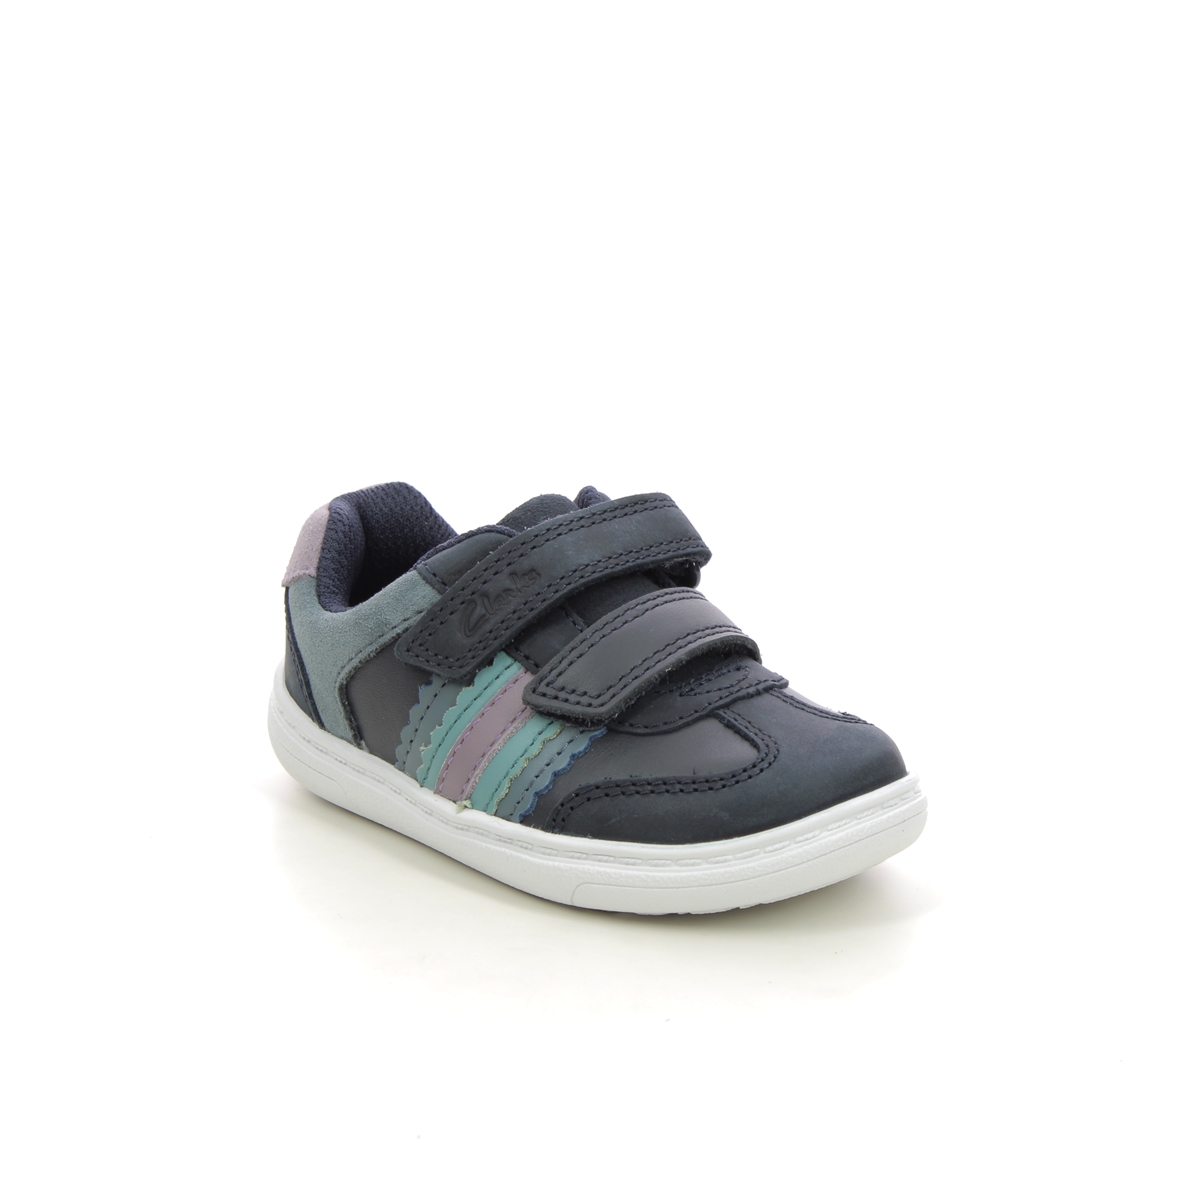 Clarks Flash Band T Navy Leather Kids First And Toddler 753956F In Size 5.5 In Plain Navy Leather F Width Fitting Regular Fit For kids